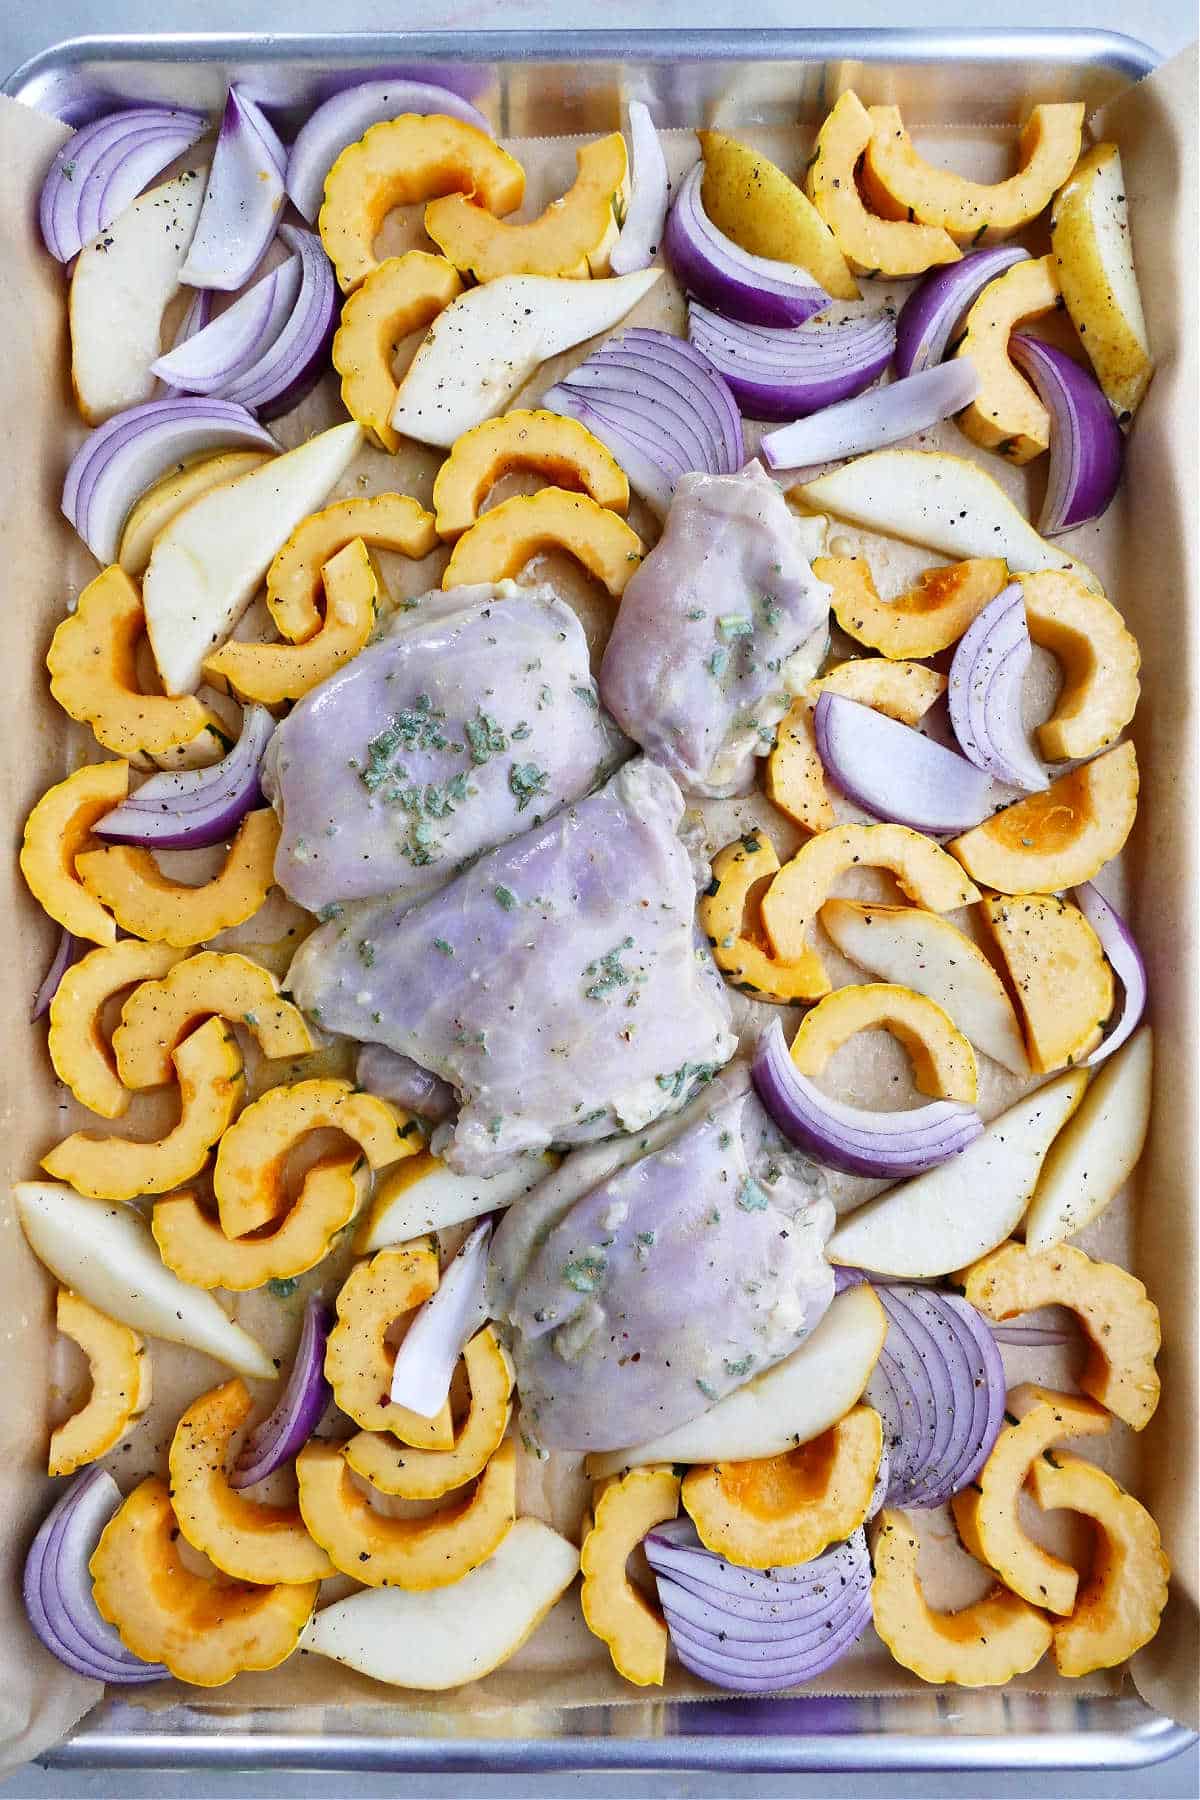 delicata squash, pears, onions, and chicken thighs spread out on a lined sheet pan